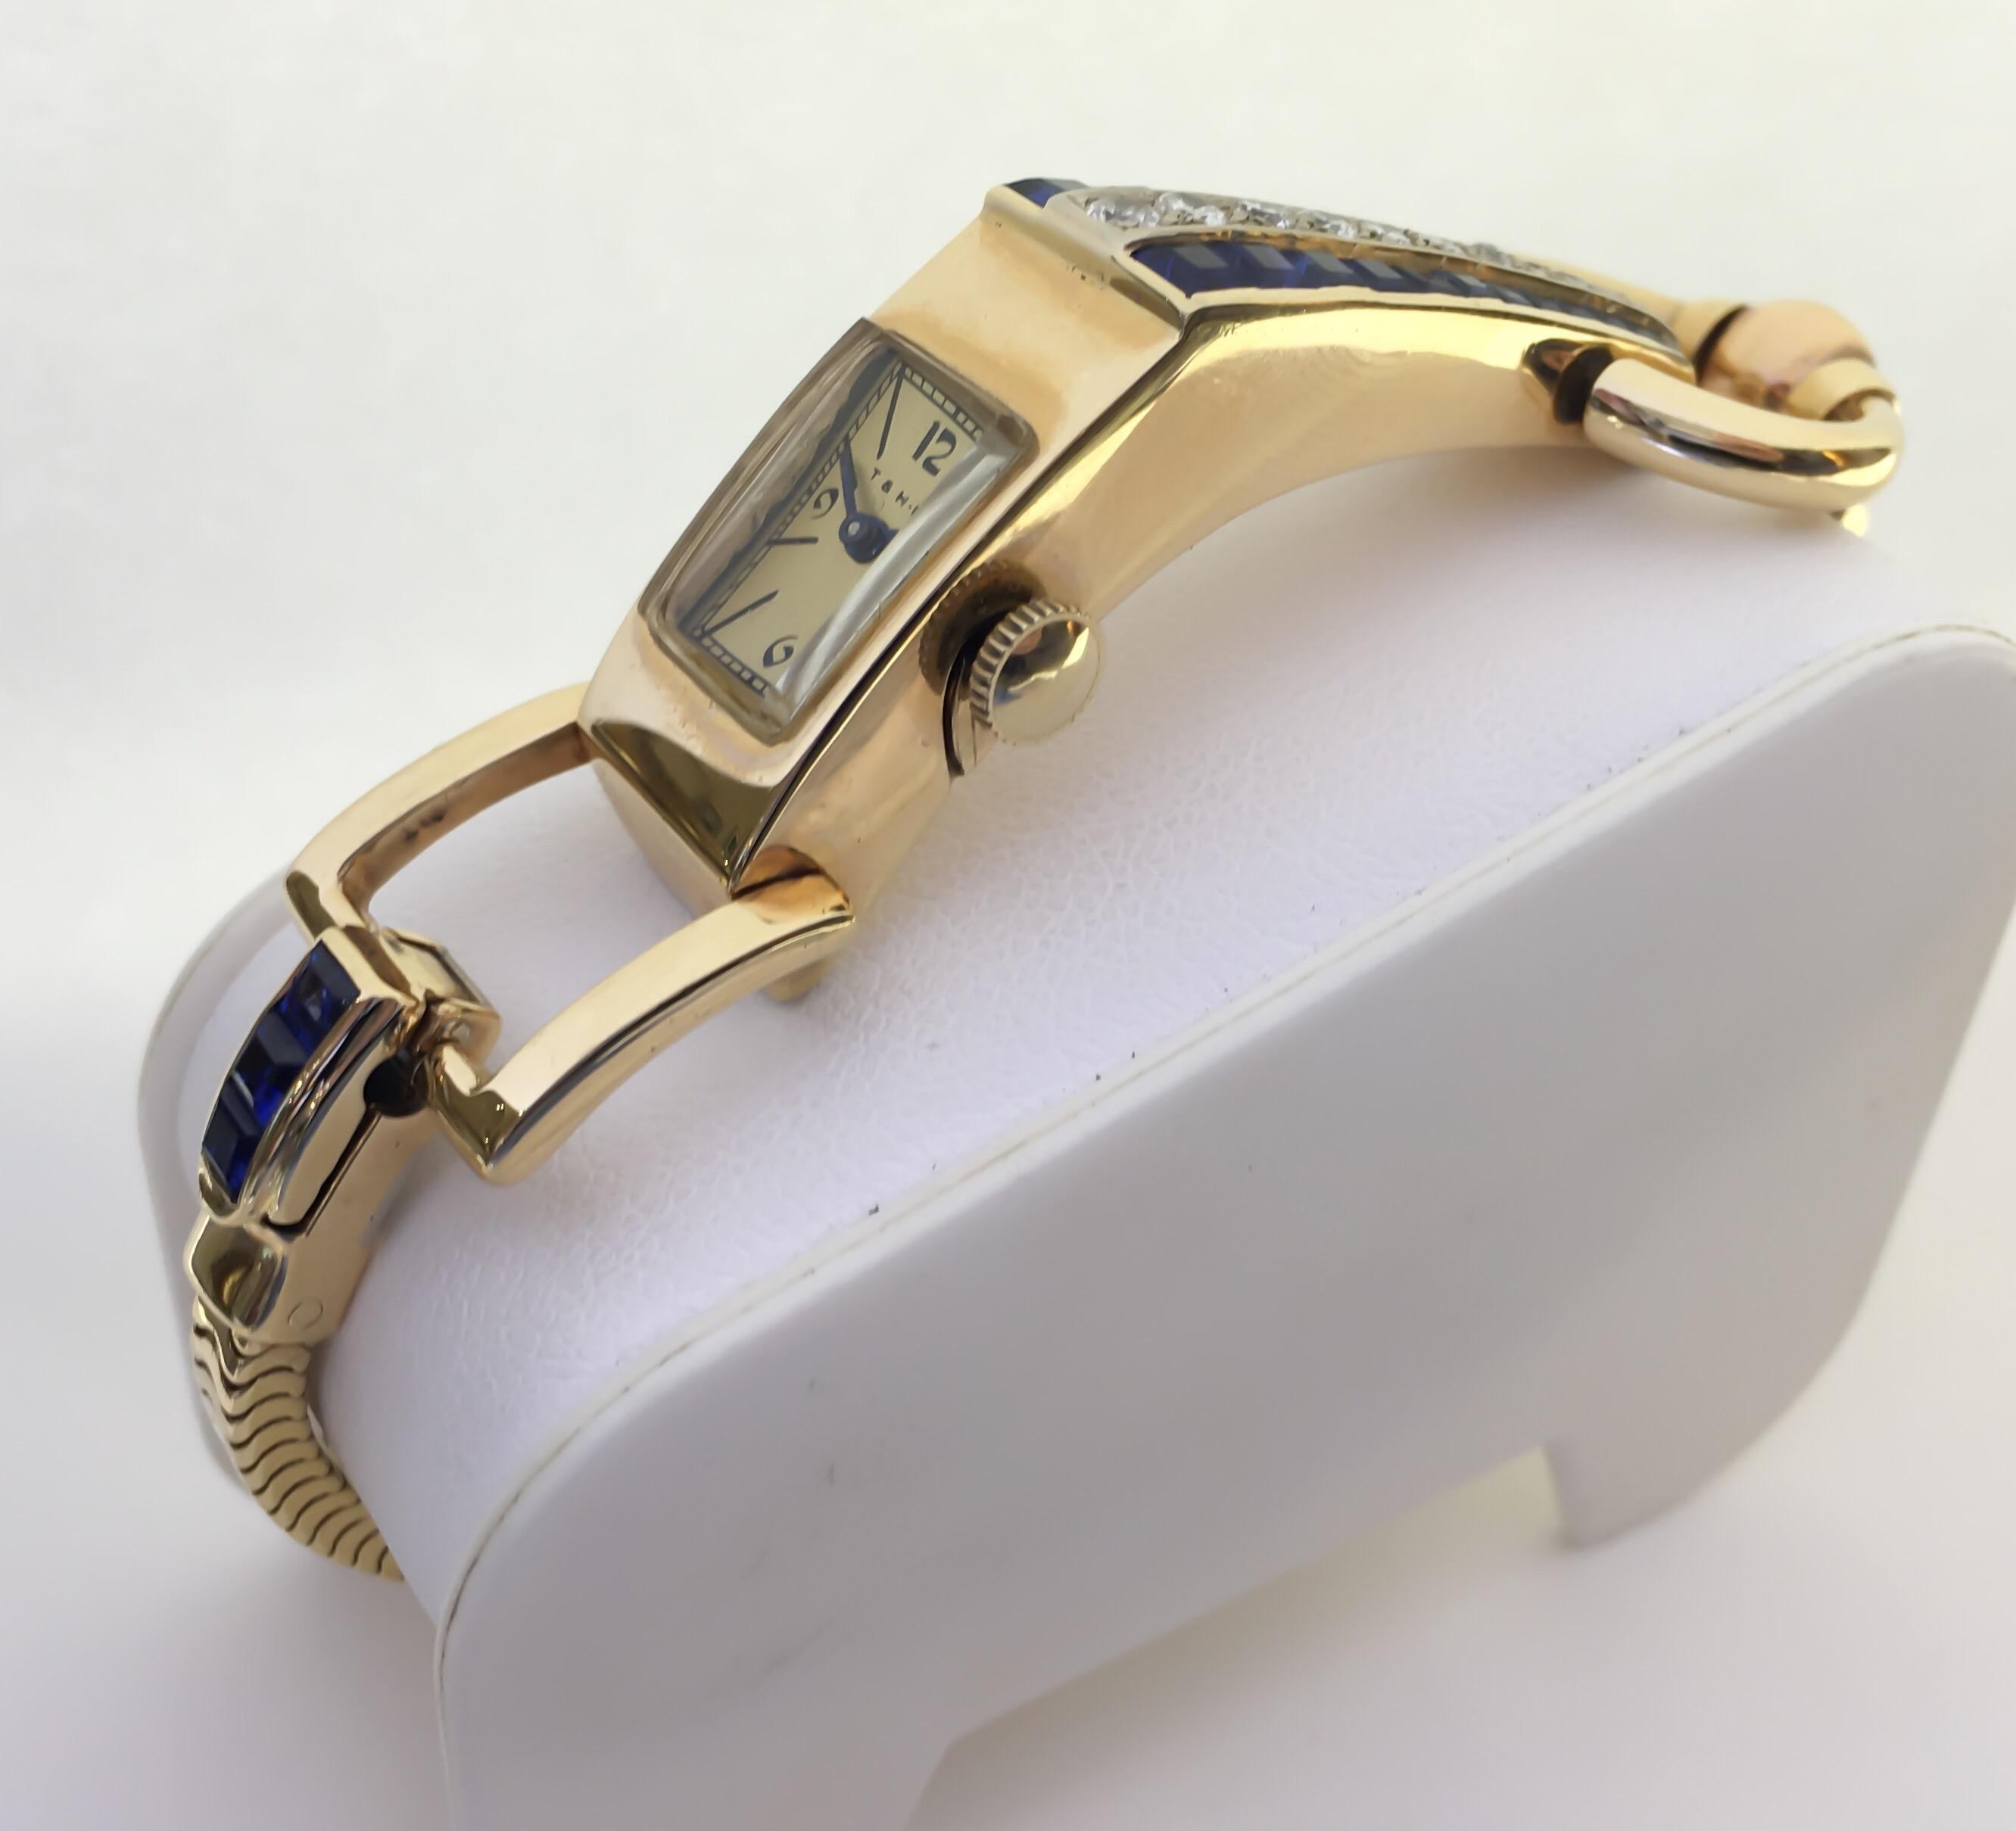 Special retro 1940's ladies Blancpain watch designed in 14 karat yellow gold. Snake chain with polished center bar for potential sizing. Fold over clasp contains square sapphires and connects to square open link near case. 

•MOVEMENT: MECHANICAL